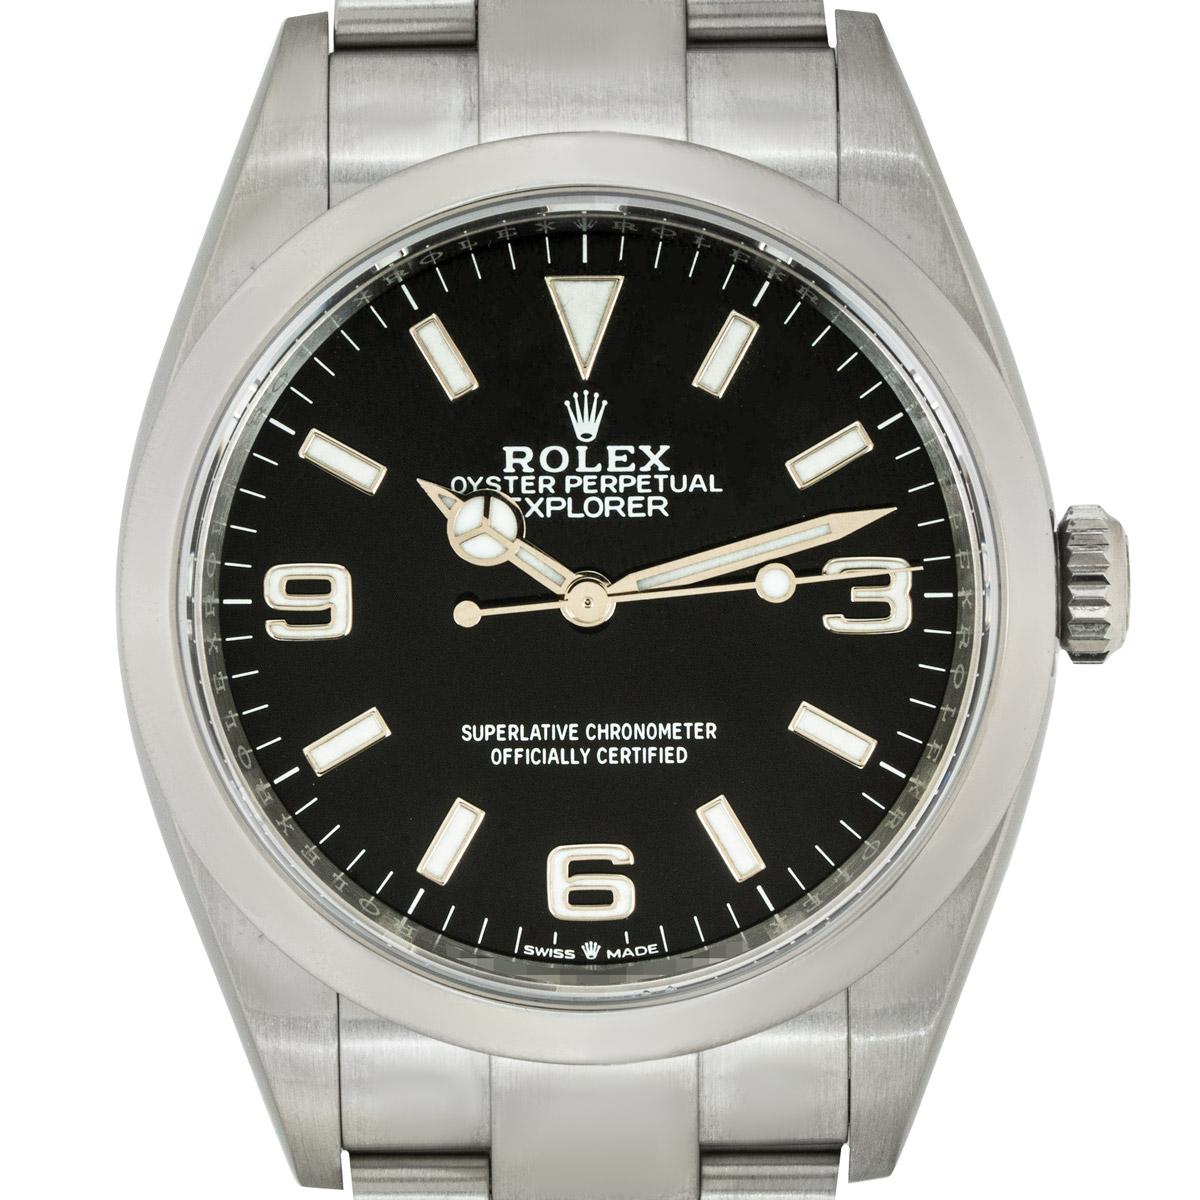 A 36mm Explorer crafted in Oystersteel by Rolex. Featuring a black dial with applied Arabic numbers and a smooth fixed bezel.

Fitted with a scratch-resistant sapphire crystal and powered by a self-winding automatic movement. The Oystersteel